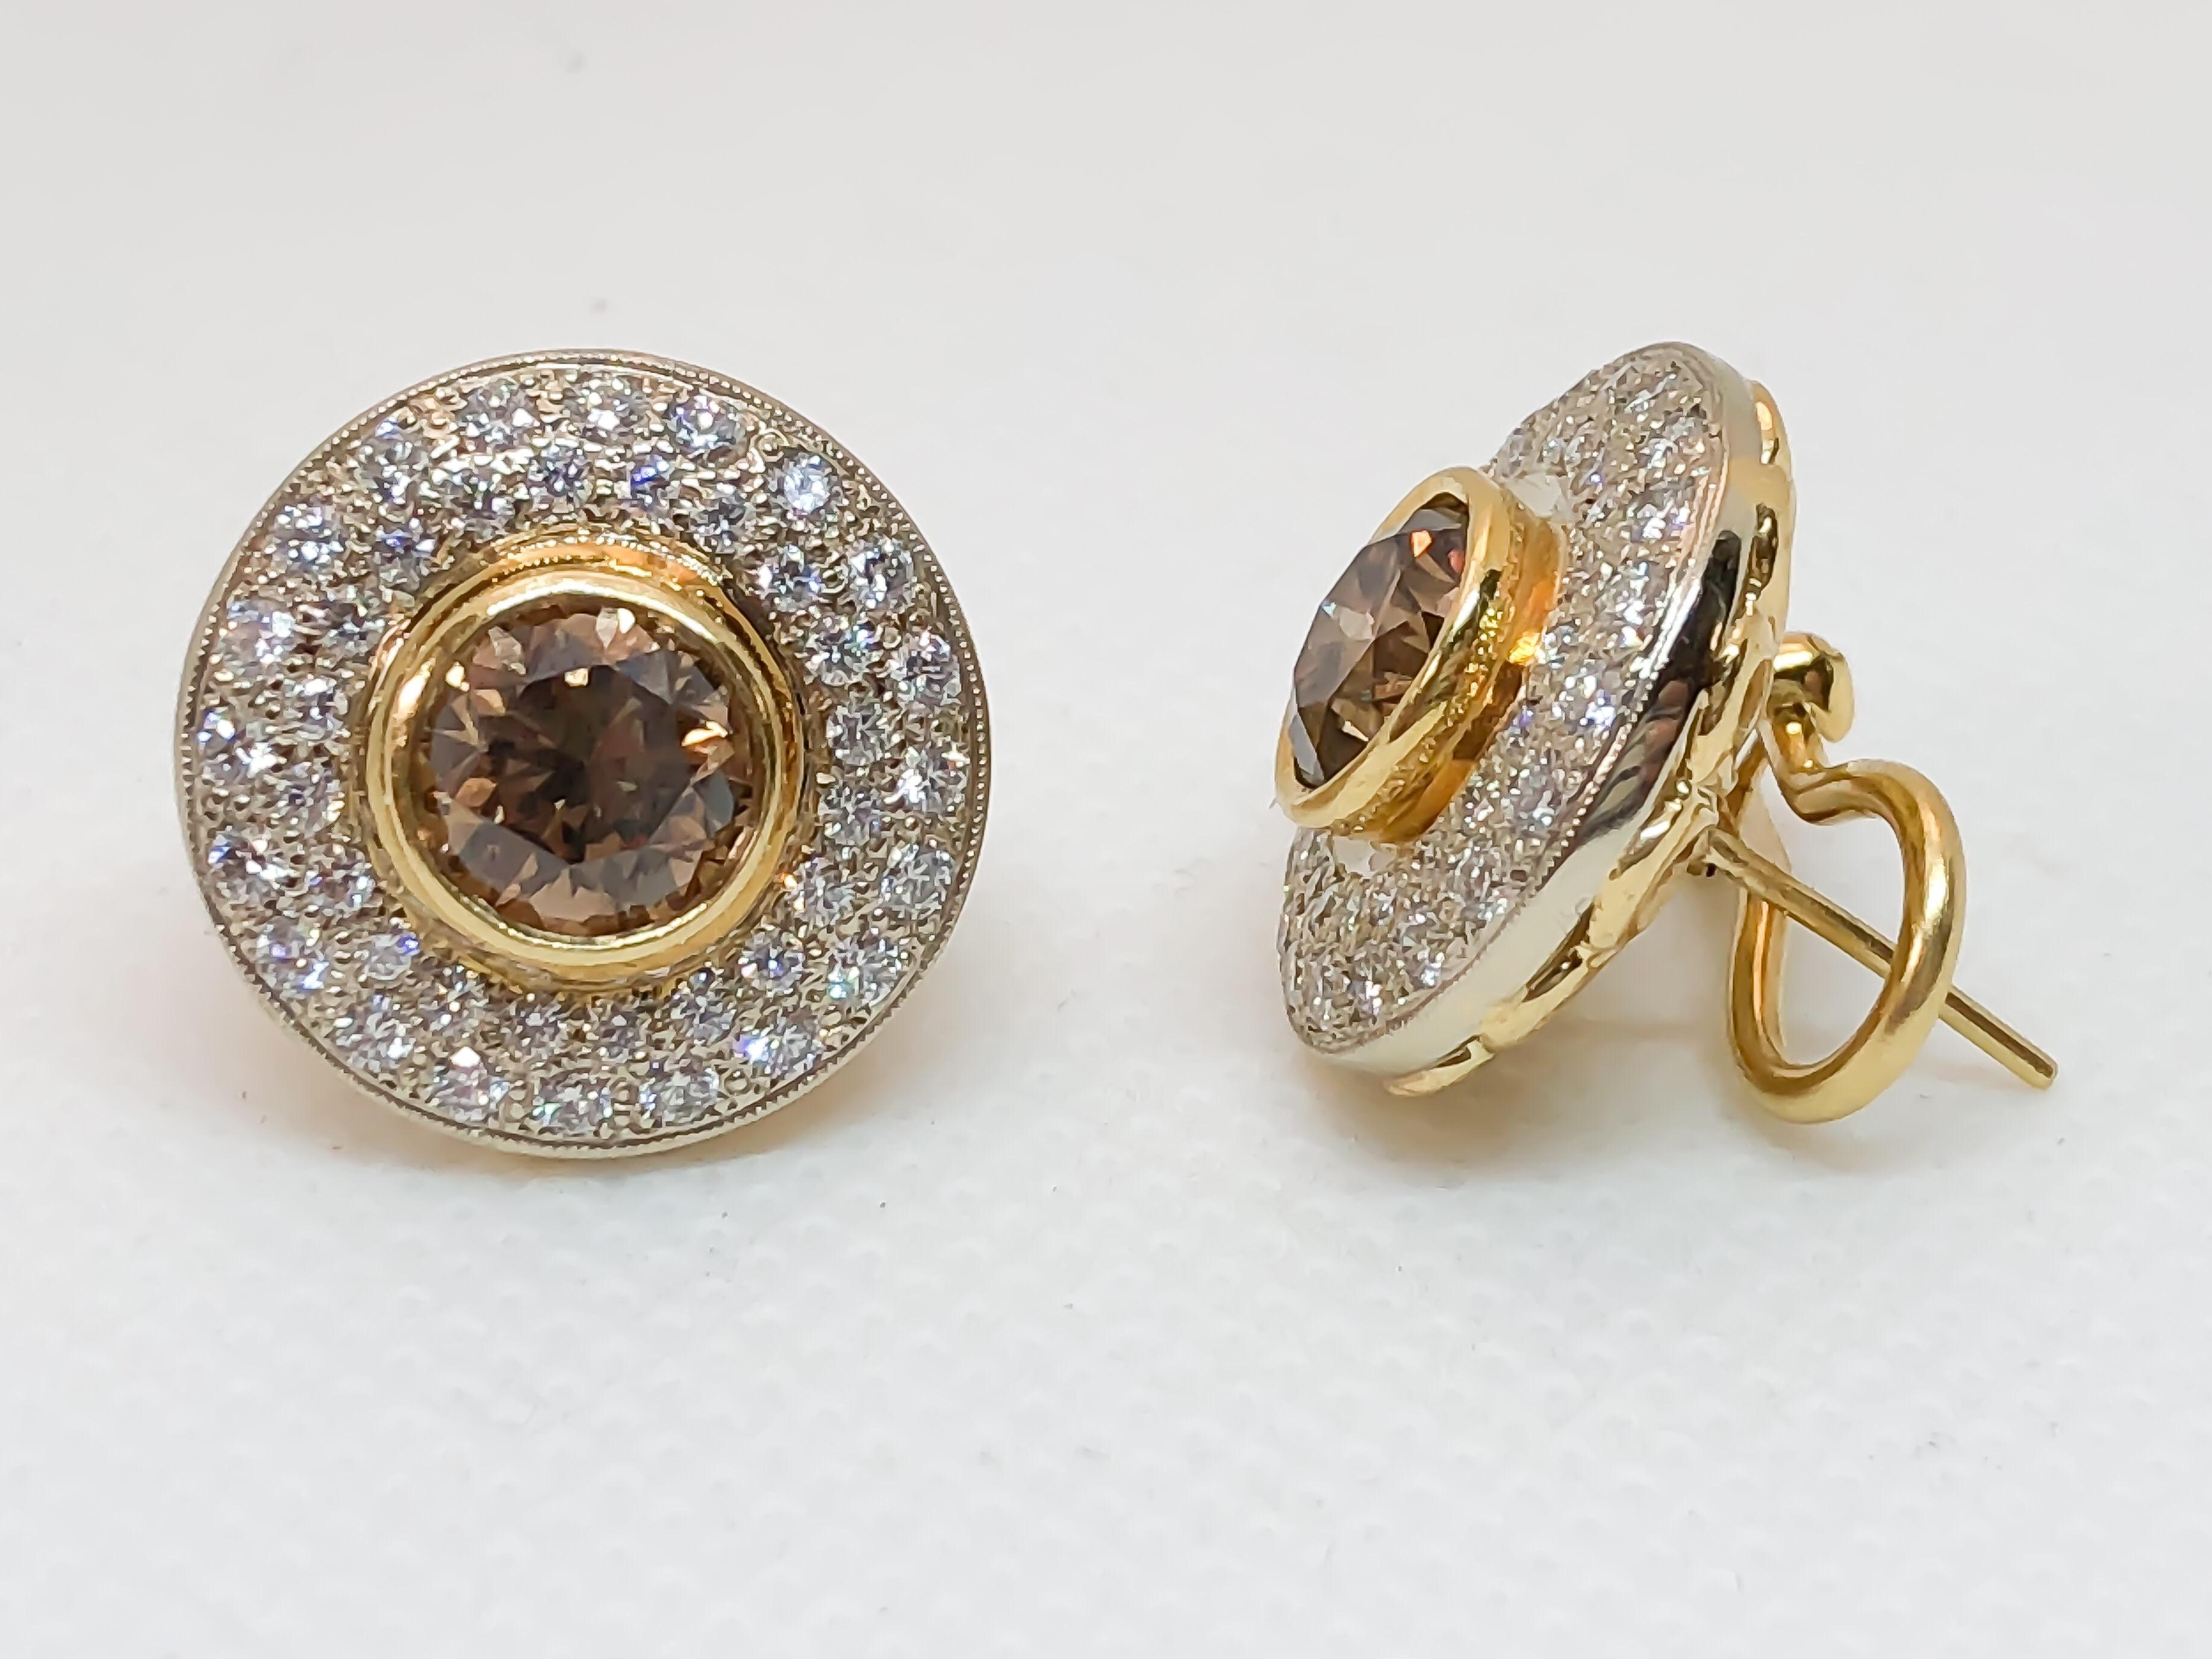 Designed and handmade by Mark Areias Jewelers. Beautiful cognac brown round brilliant cut main diamonds are bezel set in 18K yellow gold. Surrounded by two row micro pave premium white round brilliant cut diamonds in 18K white gold. The earring disc